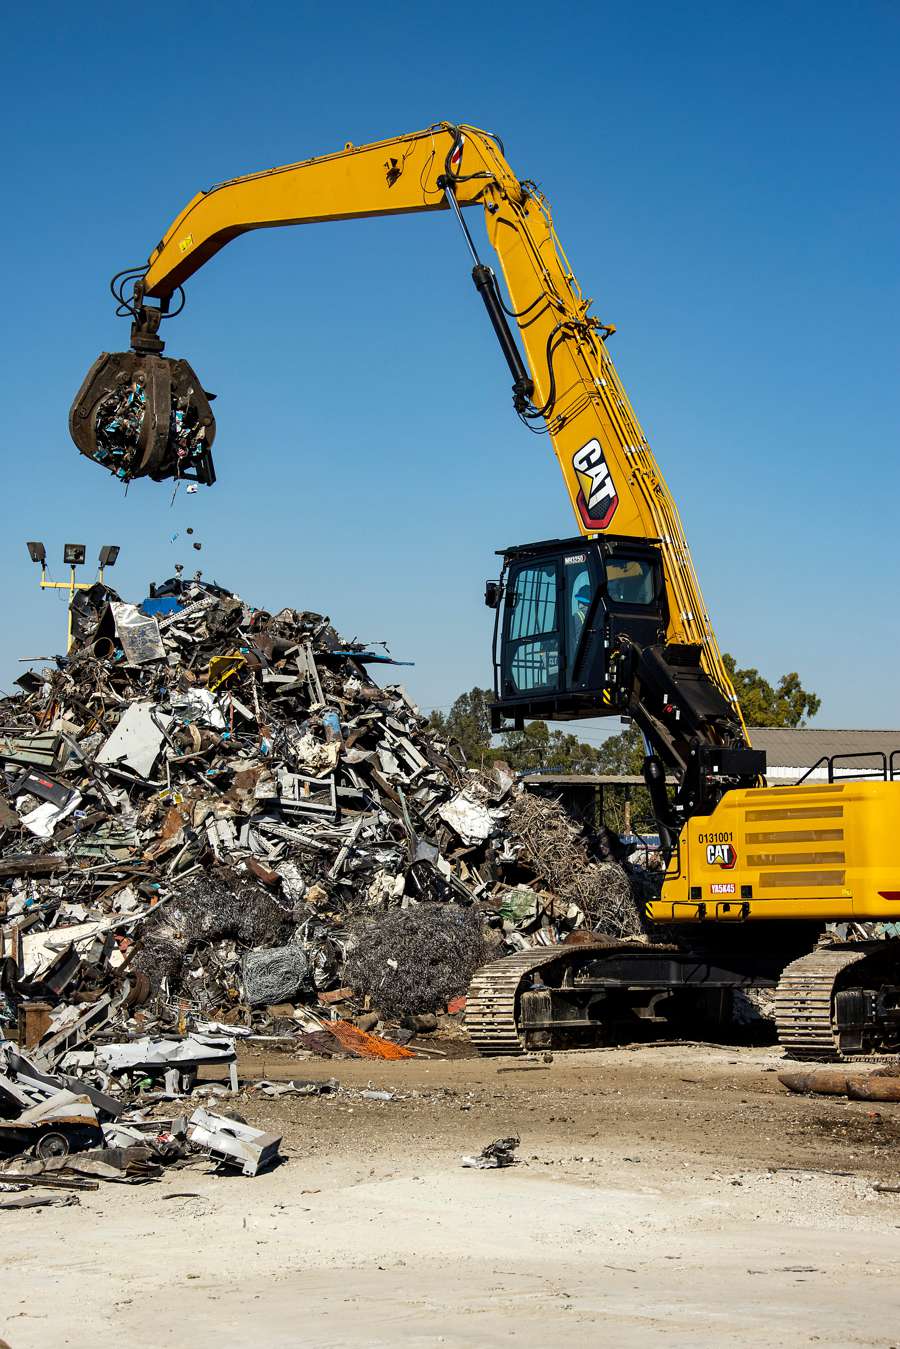 New Cat MH3250 and MH3260 Material Handlers built for the toughest applications